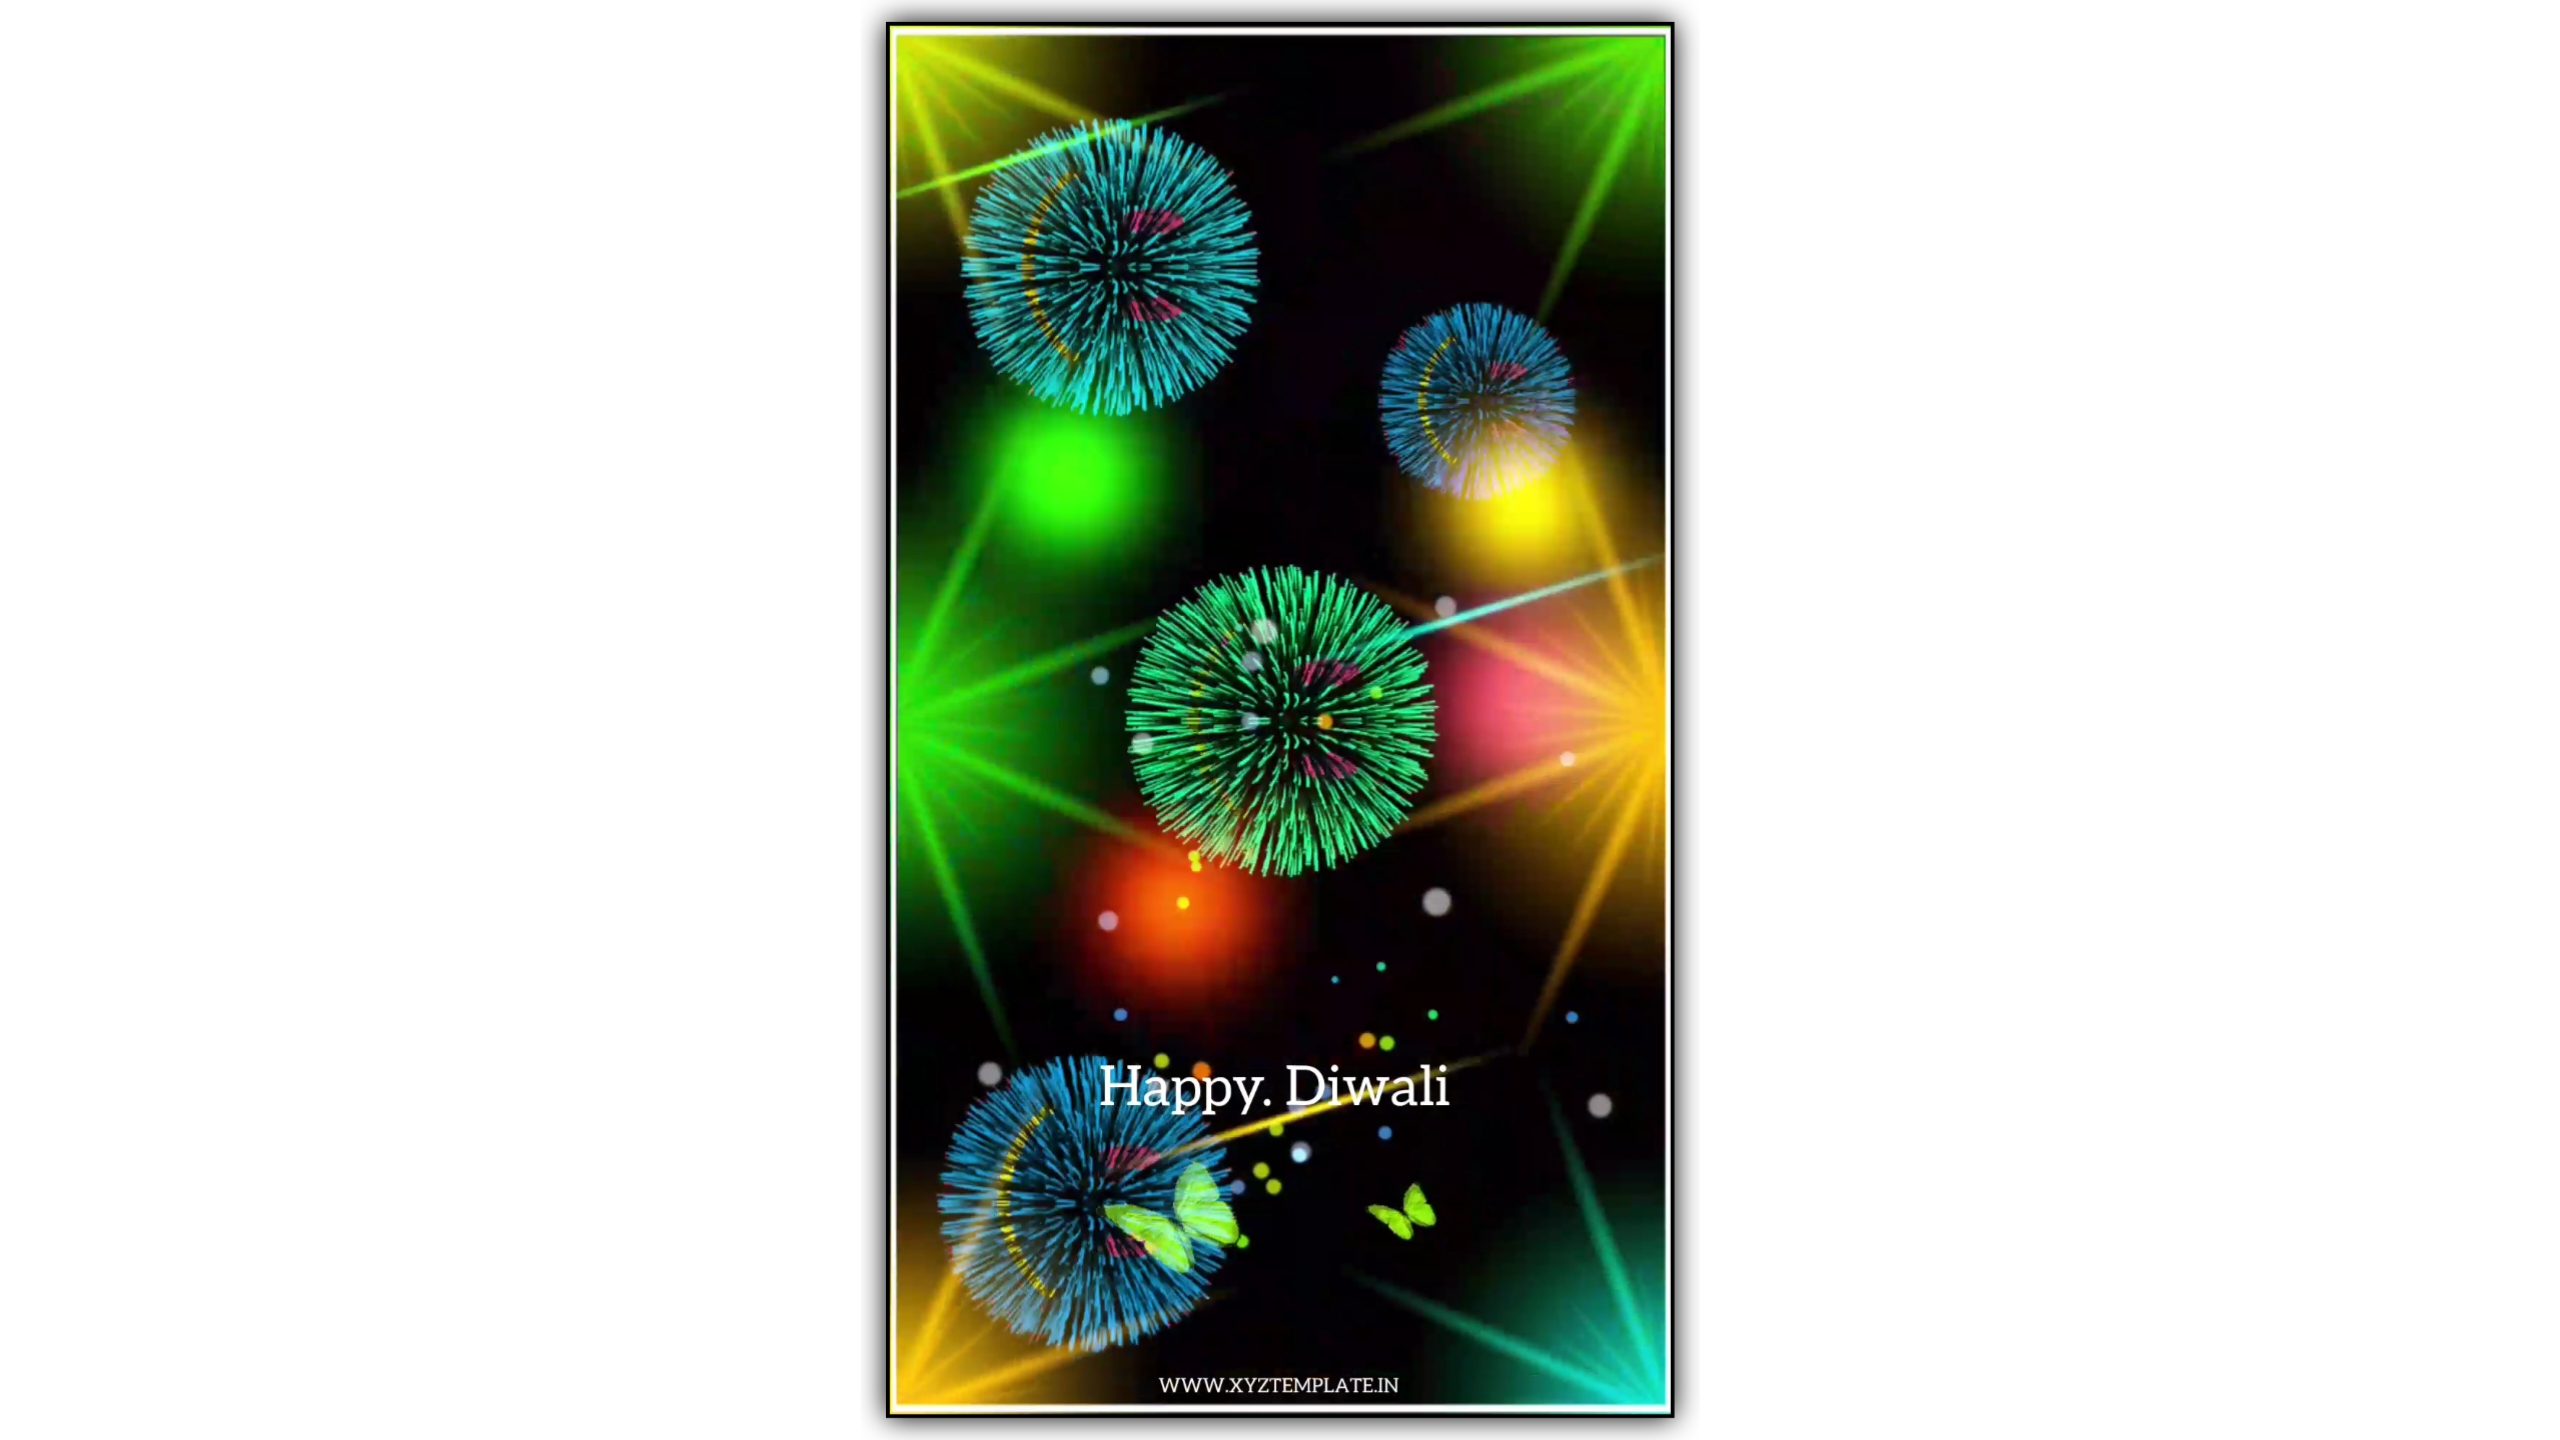 Happy Diwali special kinemaster full screen light effect video background